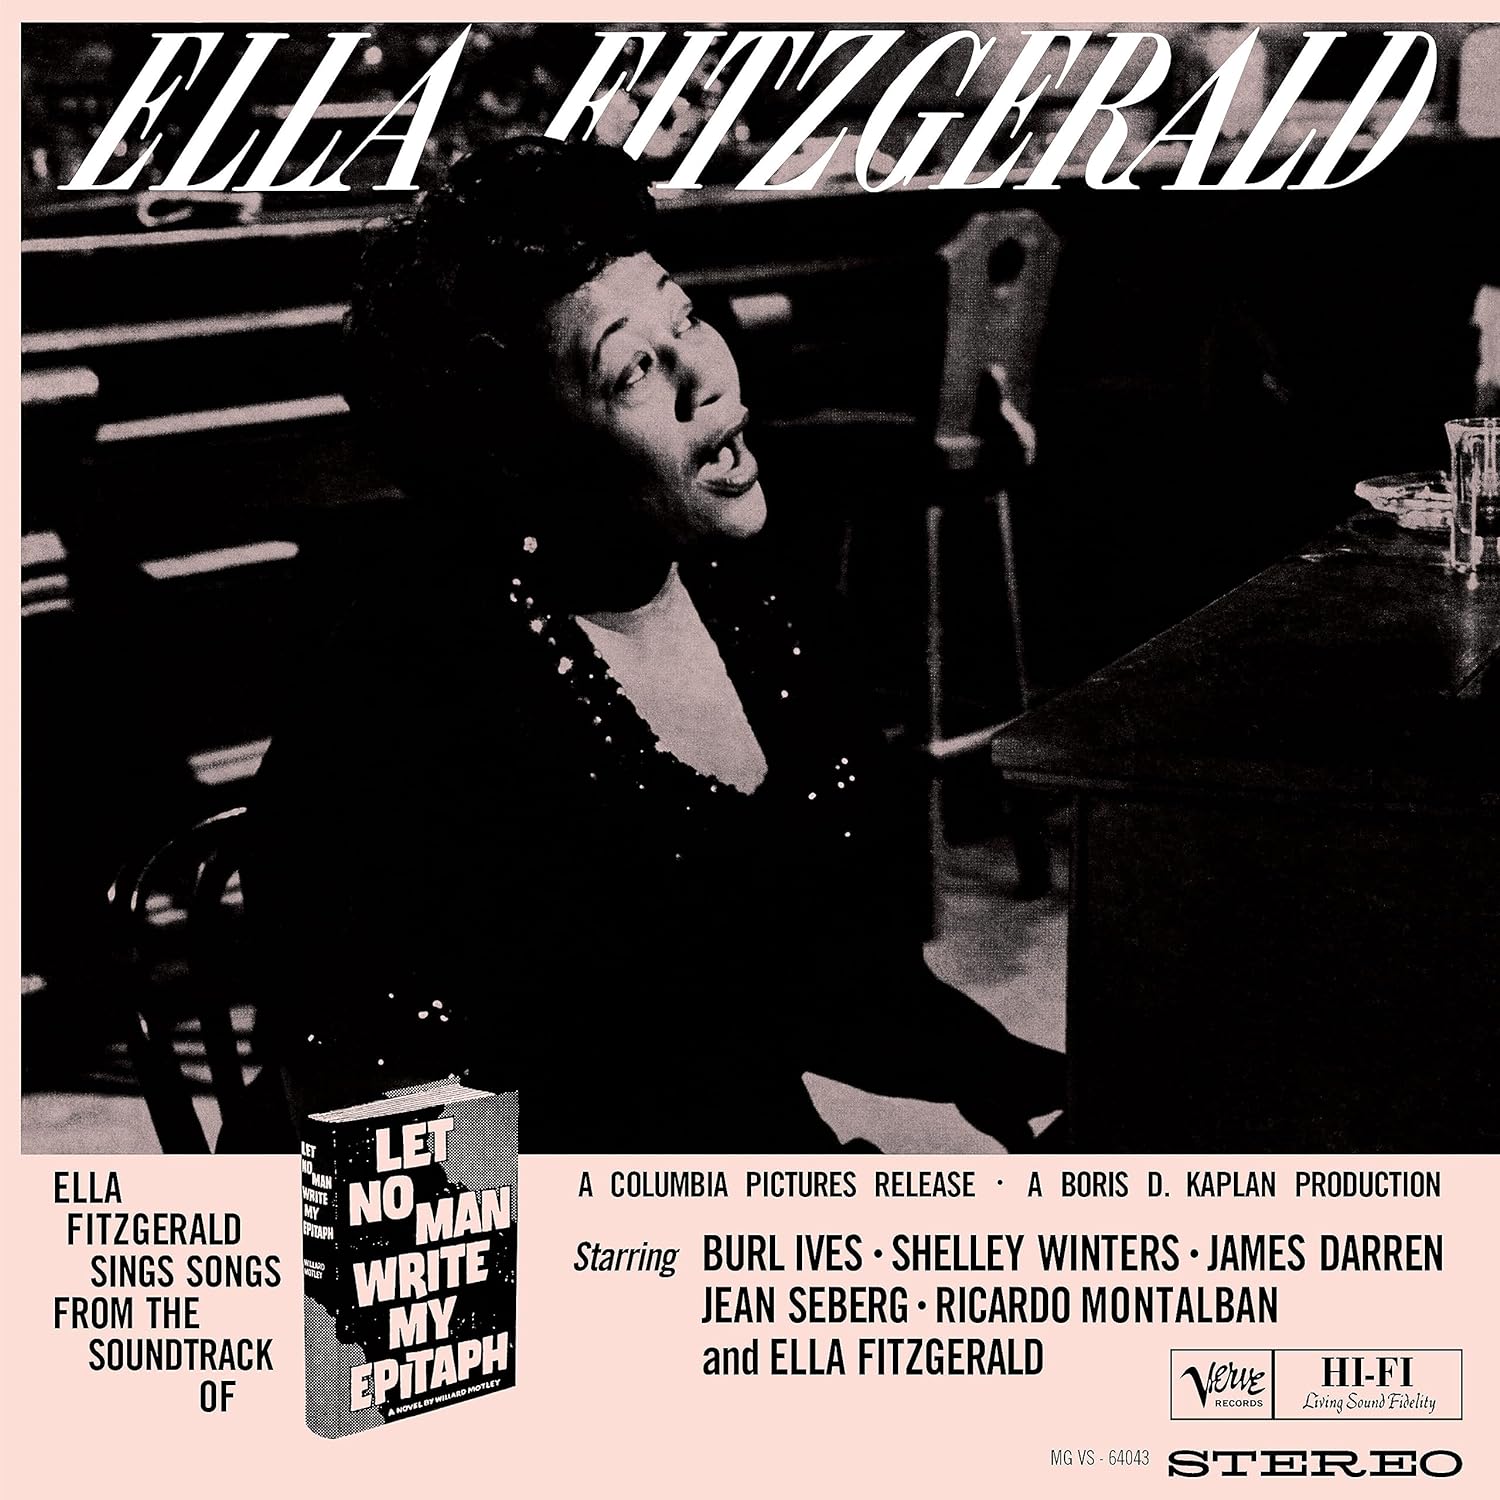 Джаз Universal US Ella Fitzgerald - Let No Man Write My Epitaph (Acoustic Sounds) (Black Vinyl LP) tangyipin w026 luggage wheel suitcase password box replacement universal wheels accessories black grey rubber anti wear casters